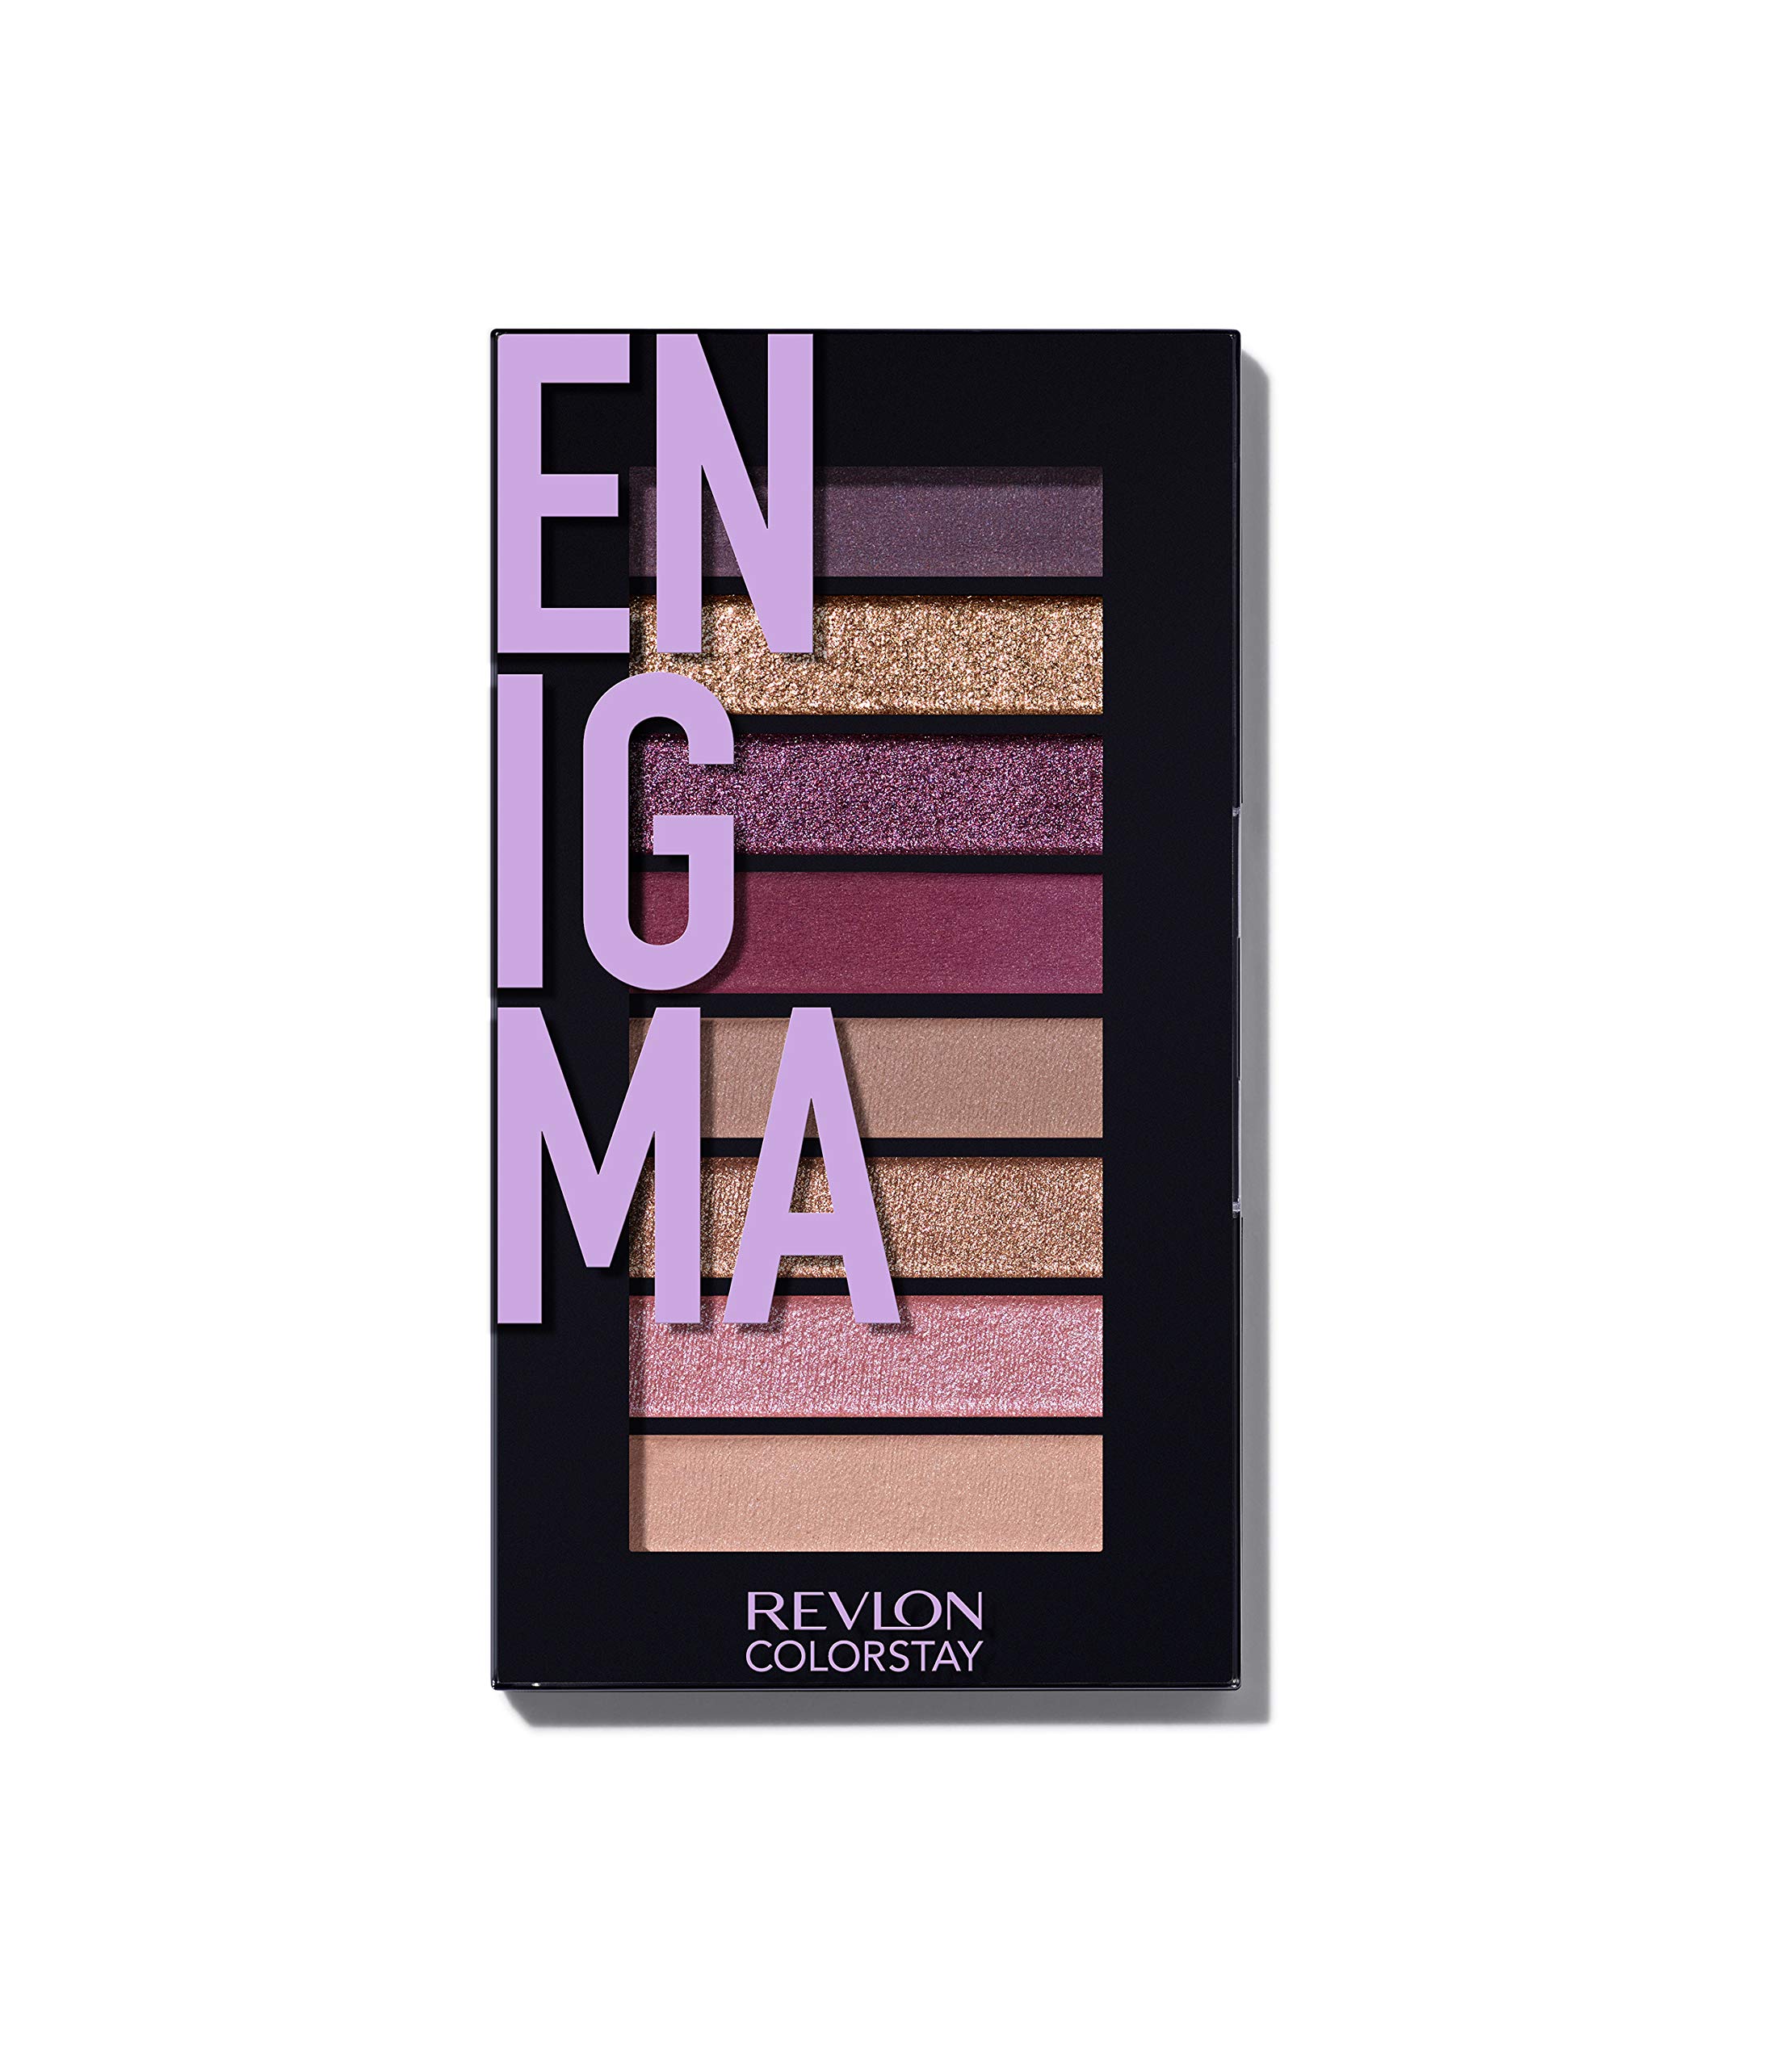 Revlon Eyeshadow Palette, ColorStay Looks Book Eye Makeup, Highly Pigmented in Blendable Matte & Metallic Finishes, 920 Enigma, 0.21 Oz